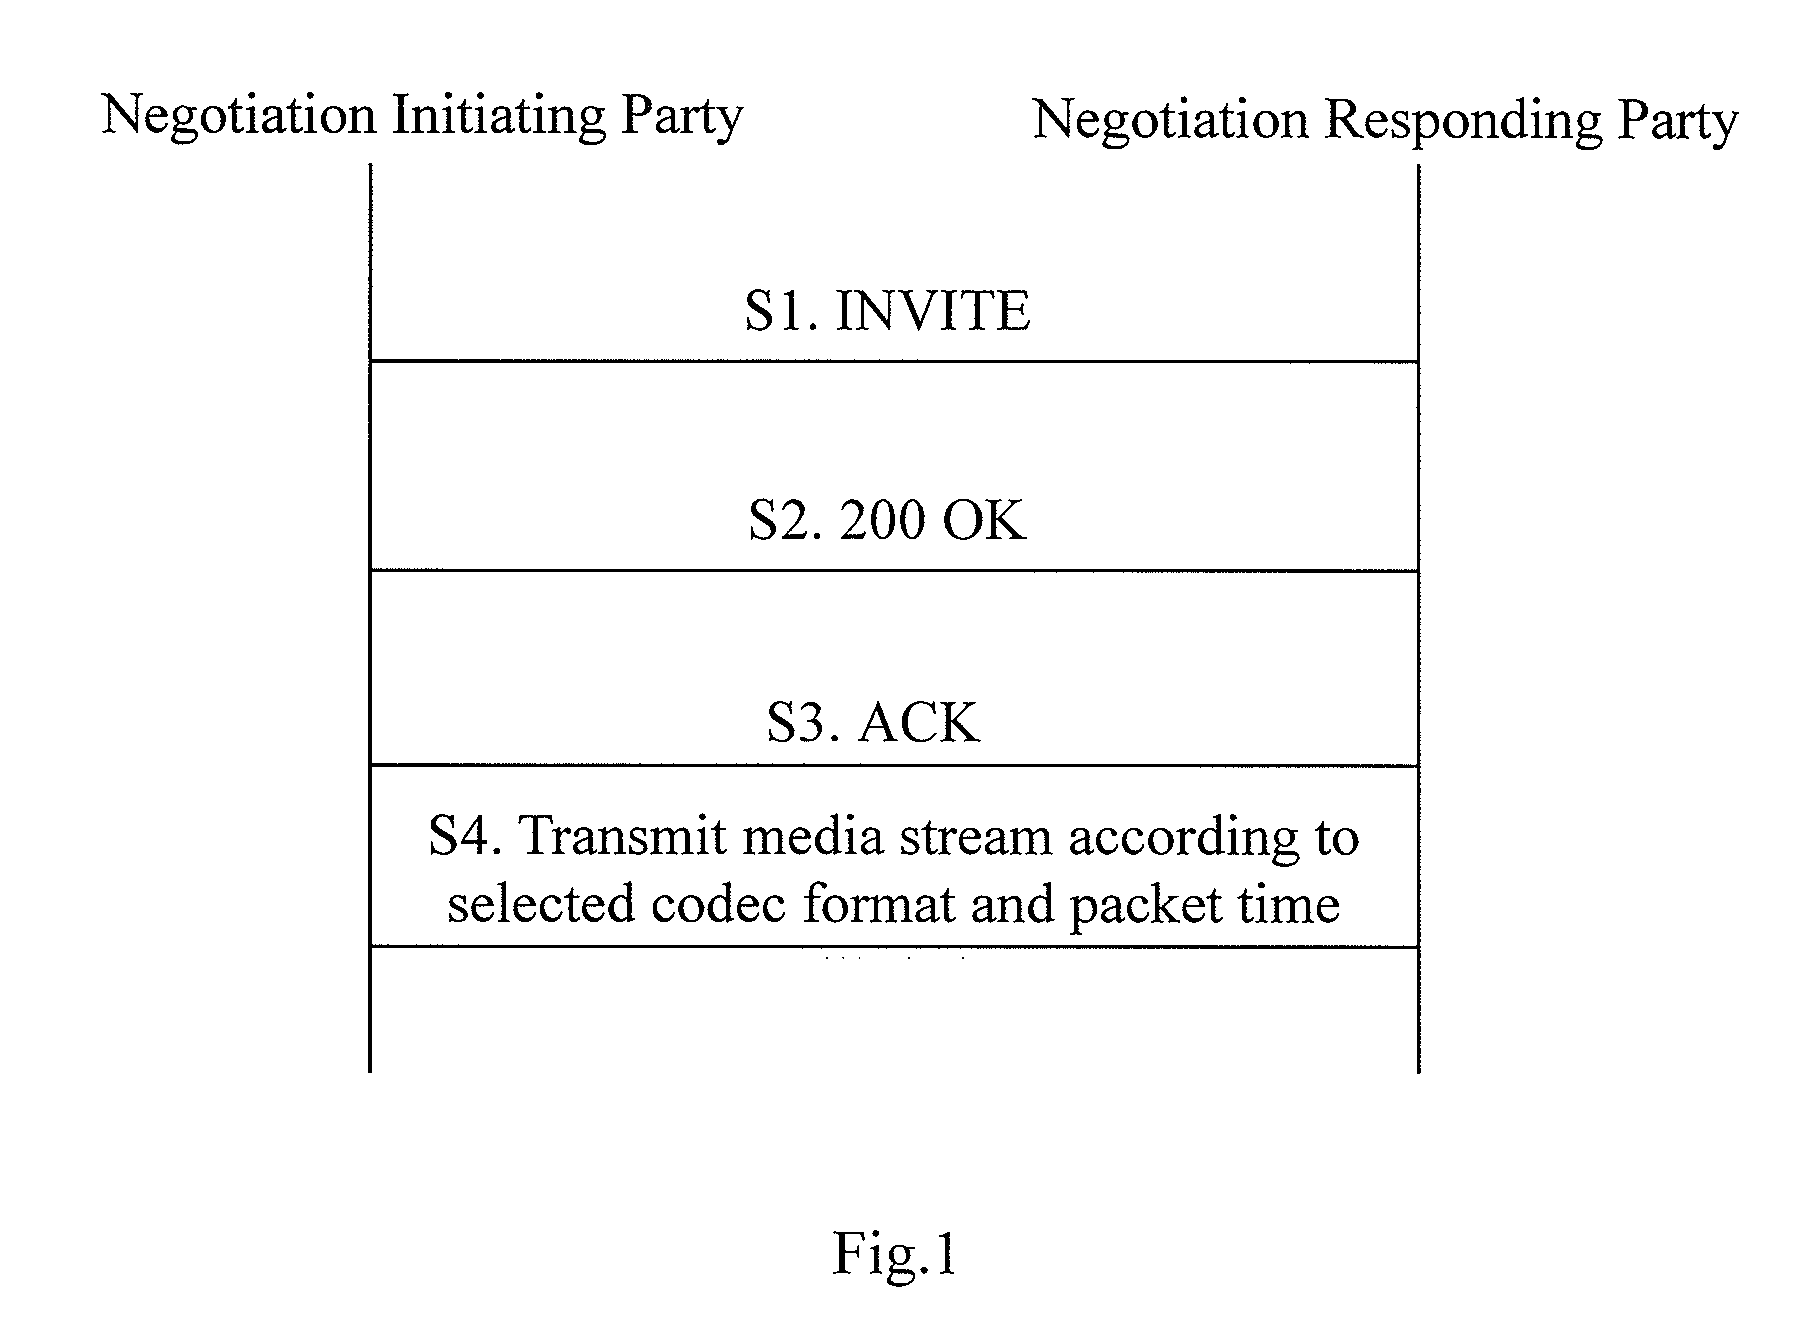 Method for negotiating about the media stream packet time length